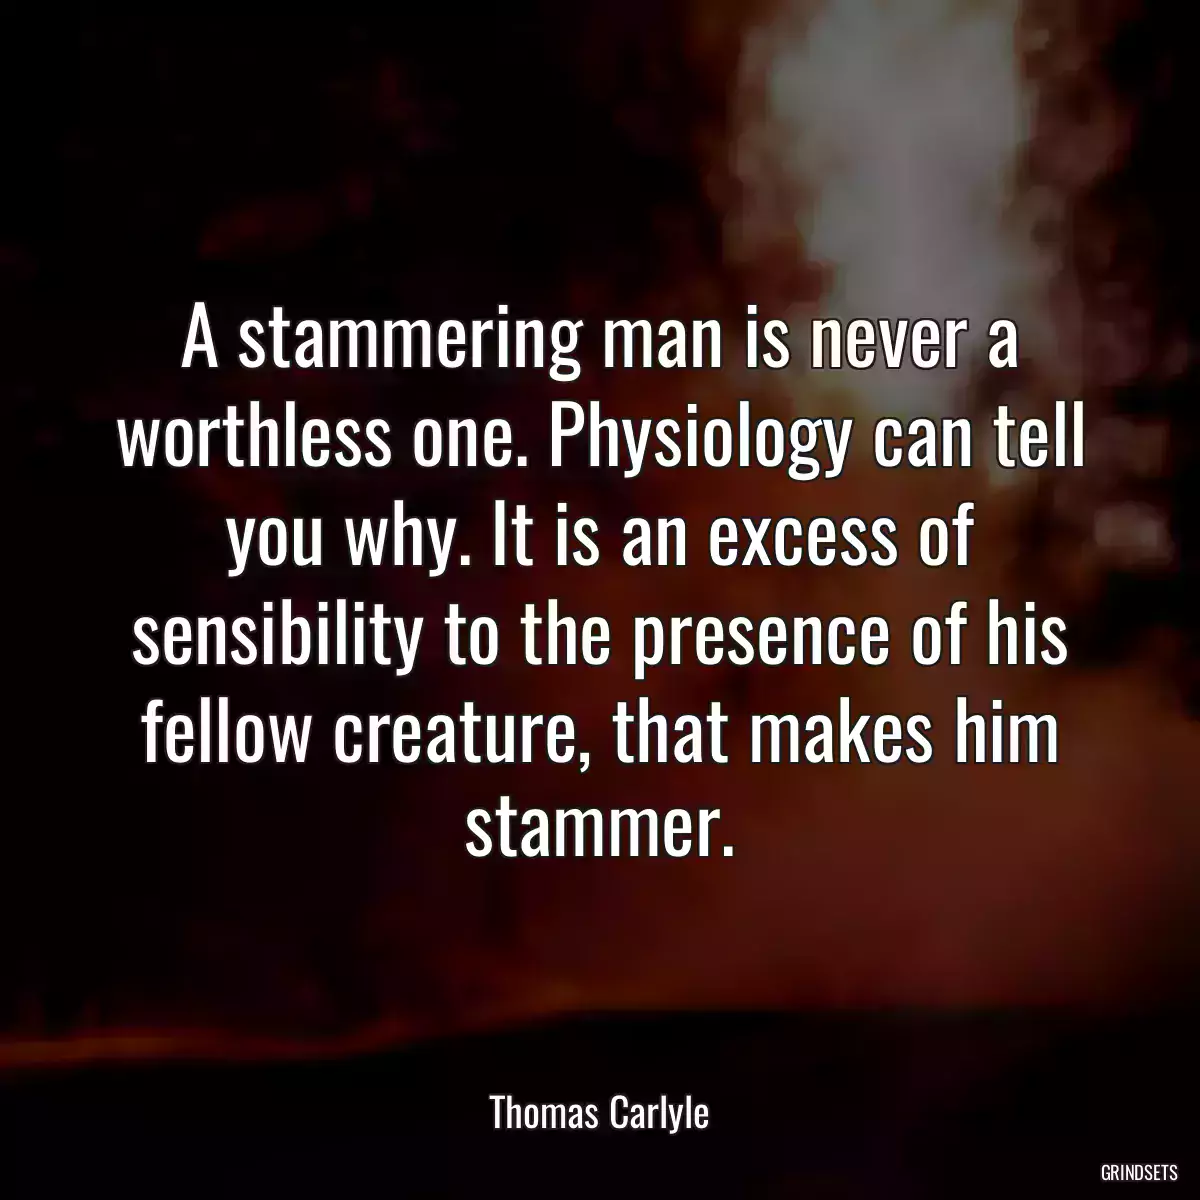 A stammering man is never a worthless one. Physiology can tell you why. It is an excess of sensibility to the presence of his fellow creature, that makes him stammer.